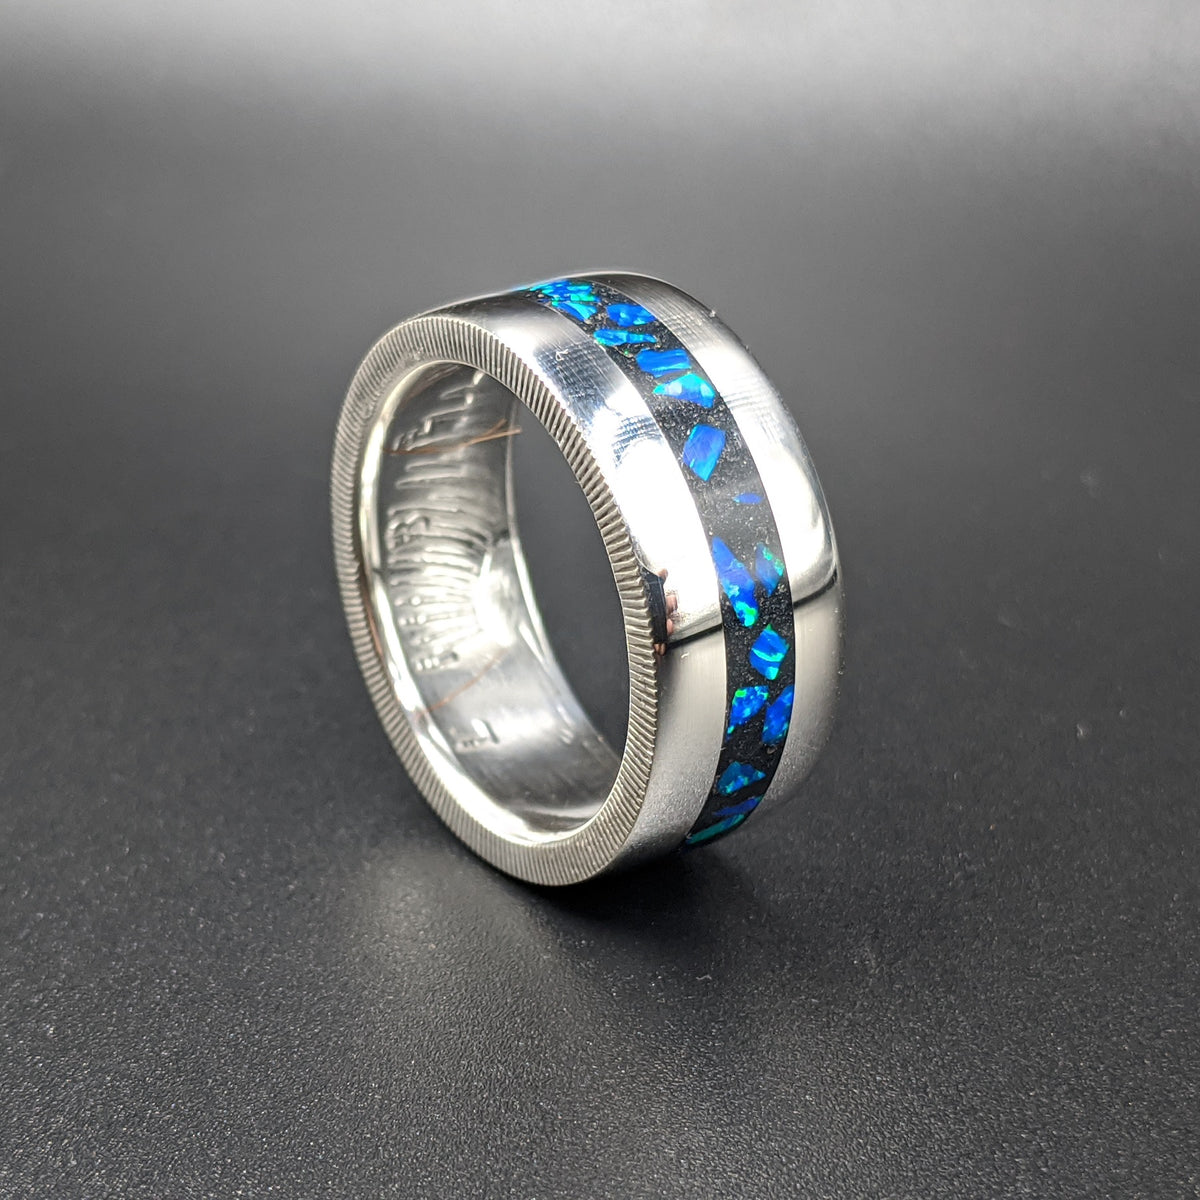 cremation jewelry as a coin ring with azure blue opal inlay